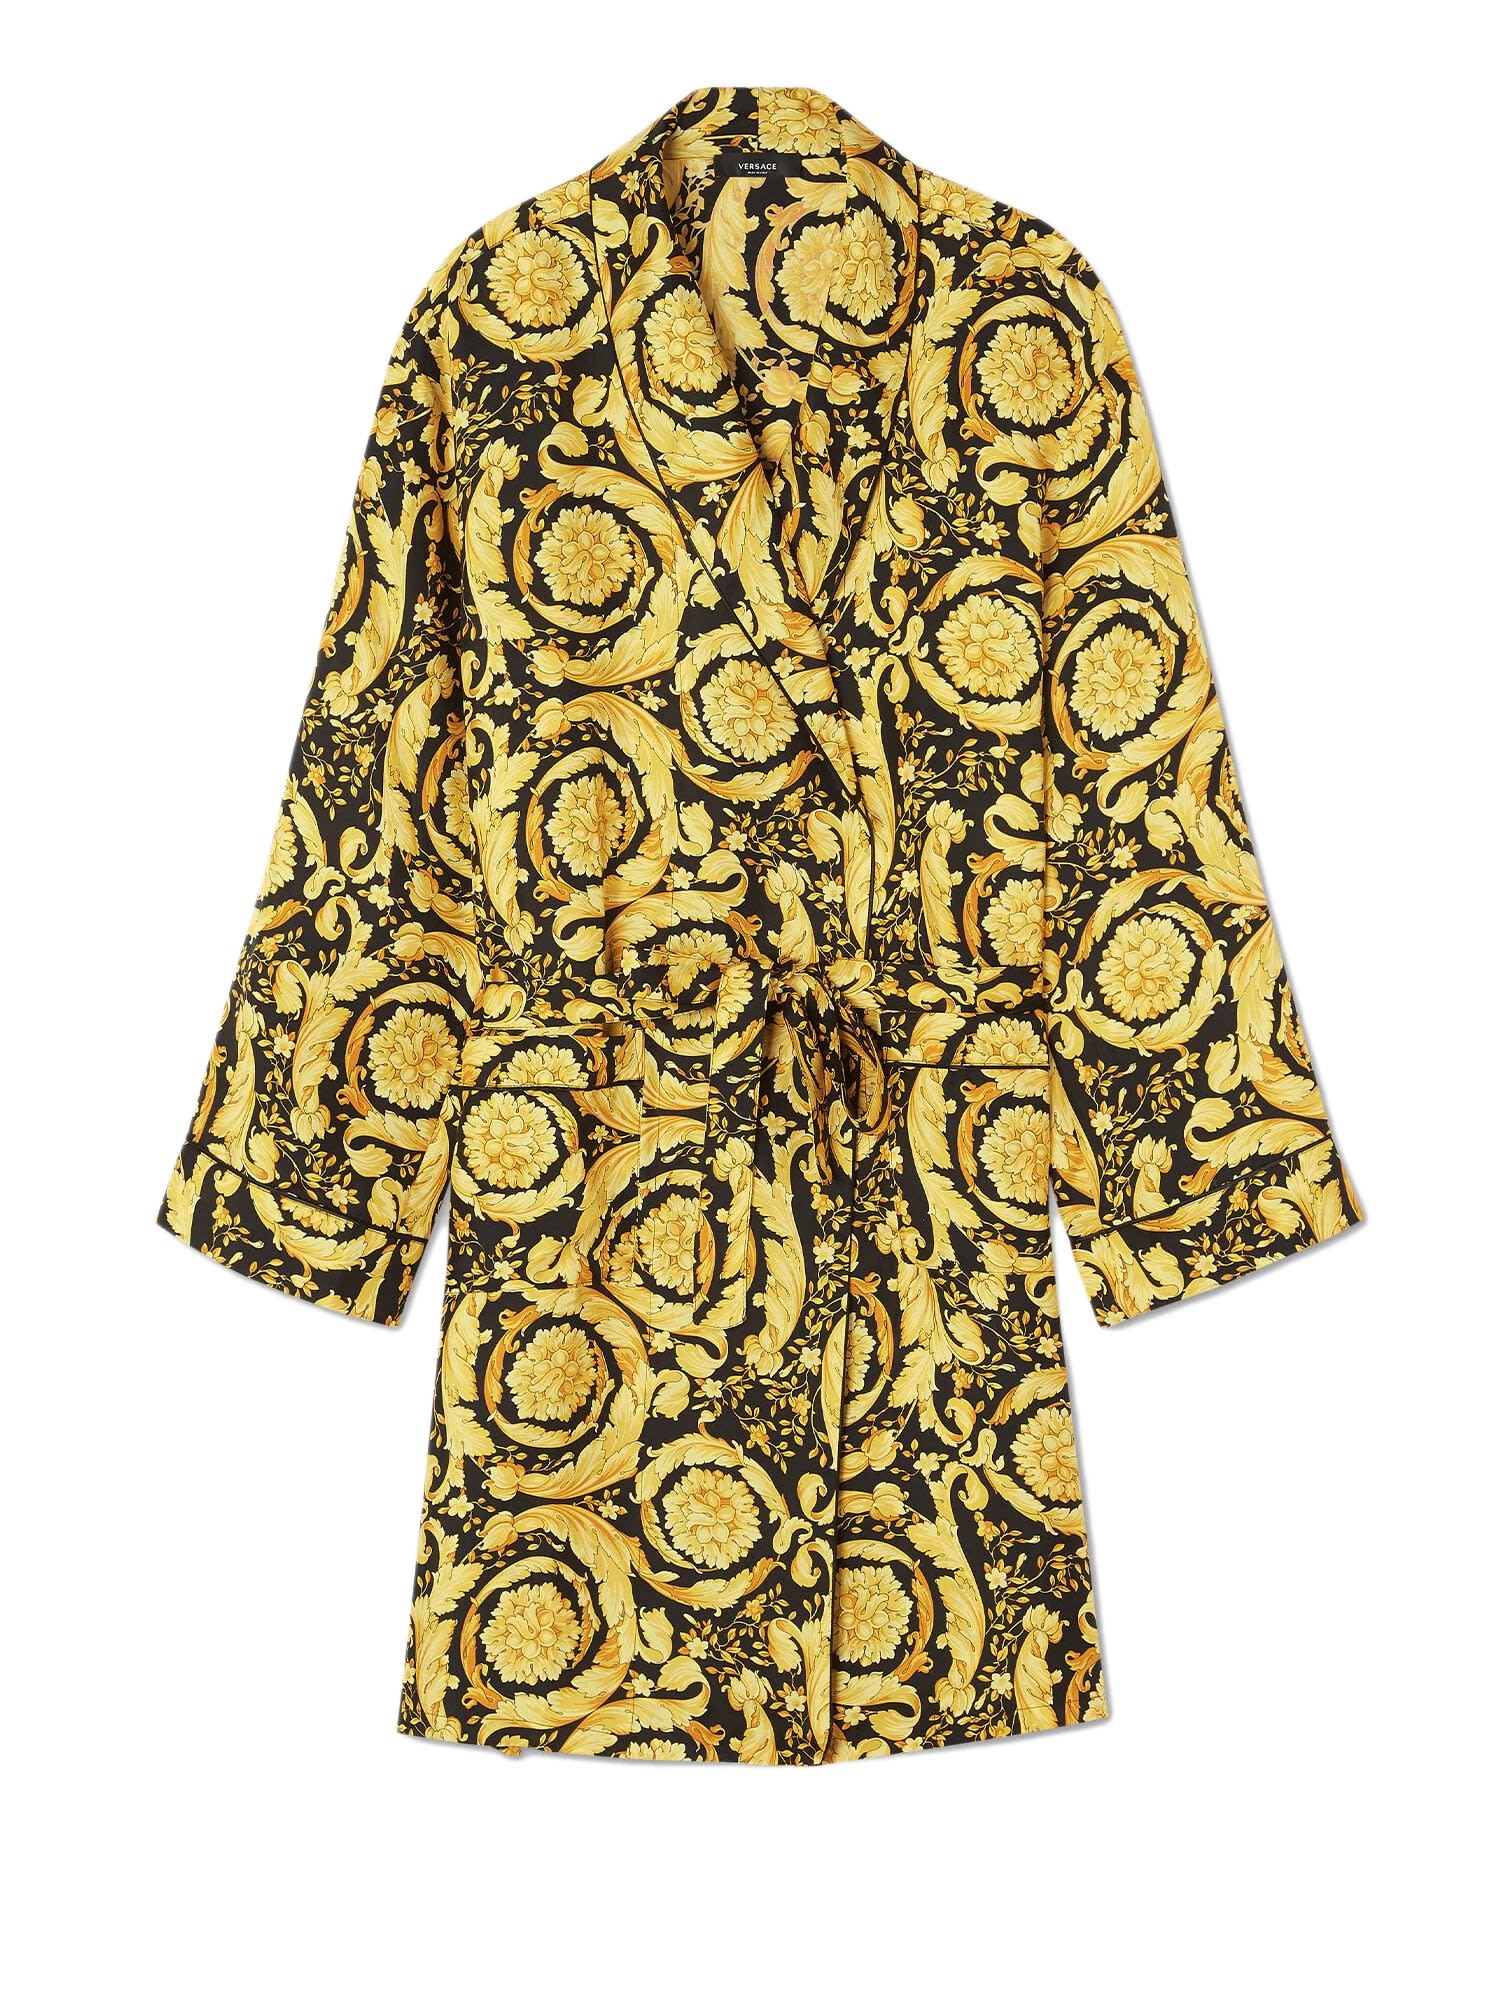 VERSACE ROBE WITH BAROQUE PRINT